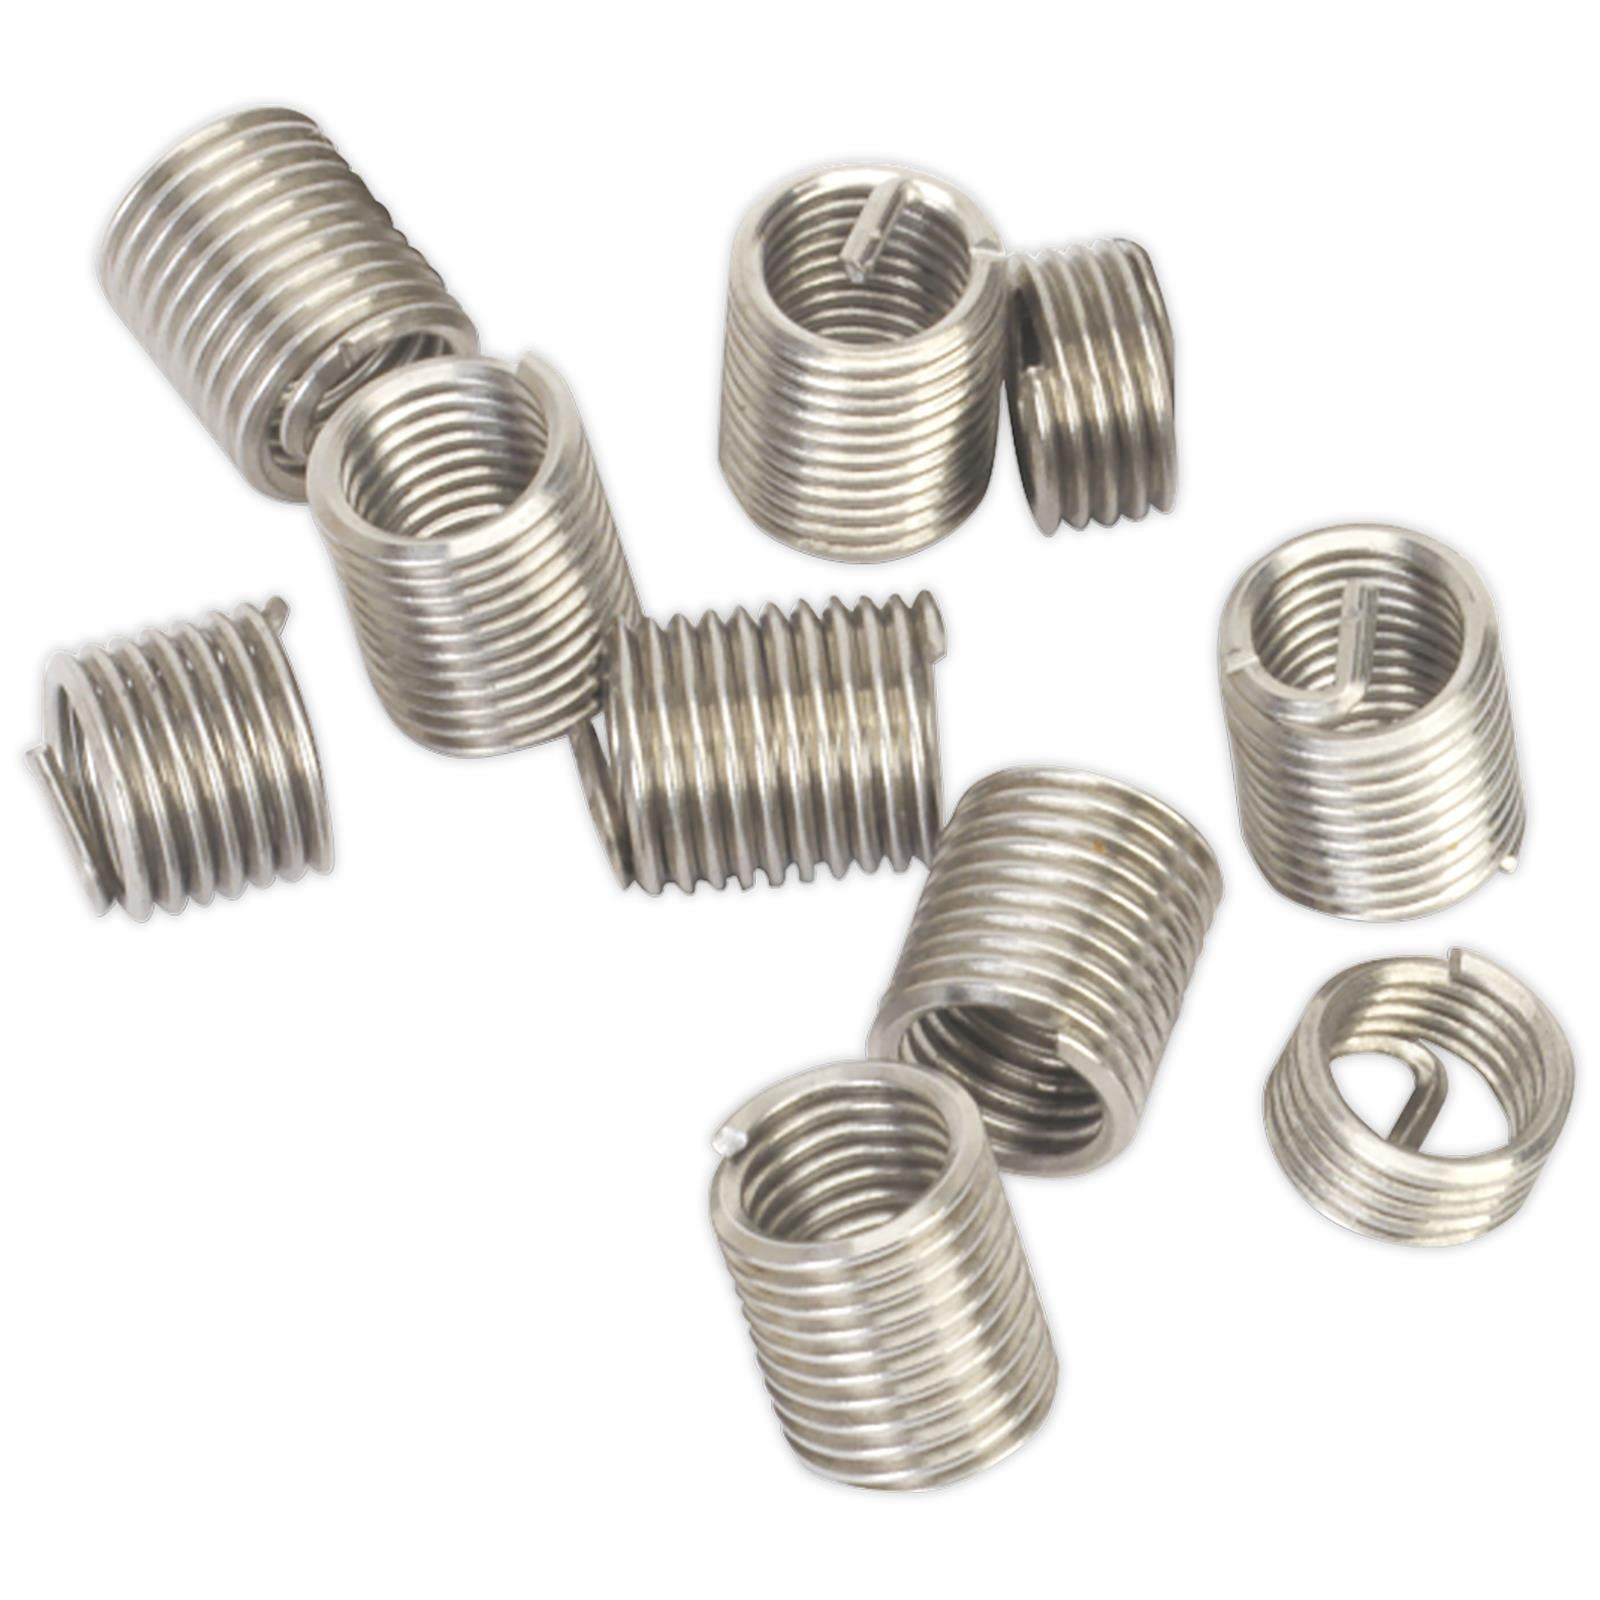 Sealey Thread Insert M9 x 1.25mm for TRM9 Threaded Inserts Helicoil 10 Pack